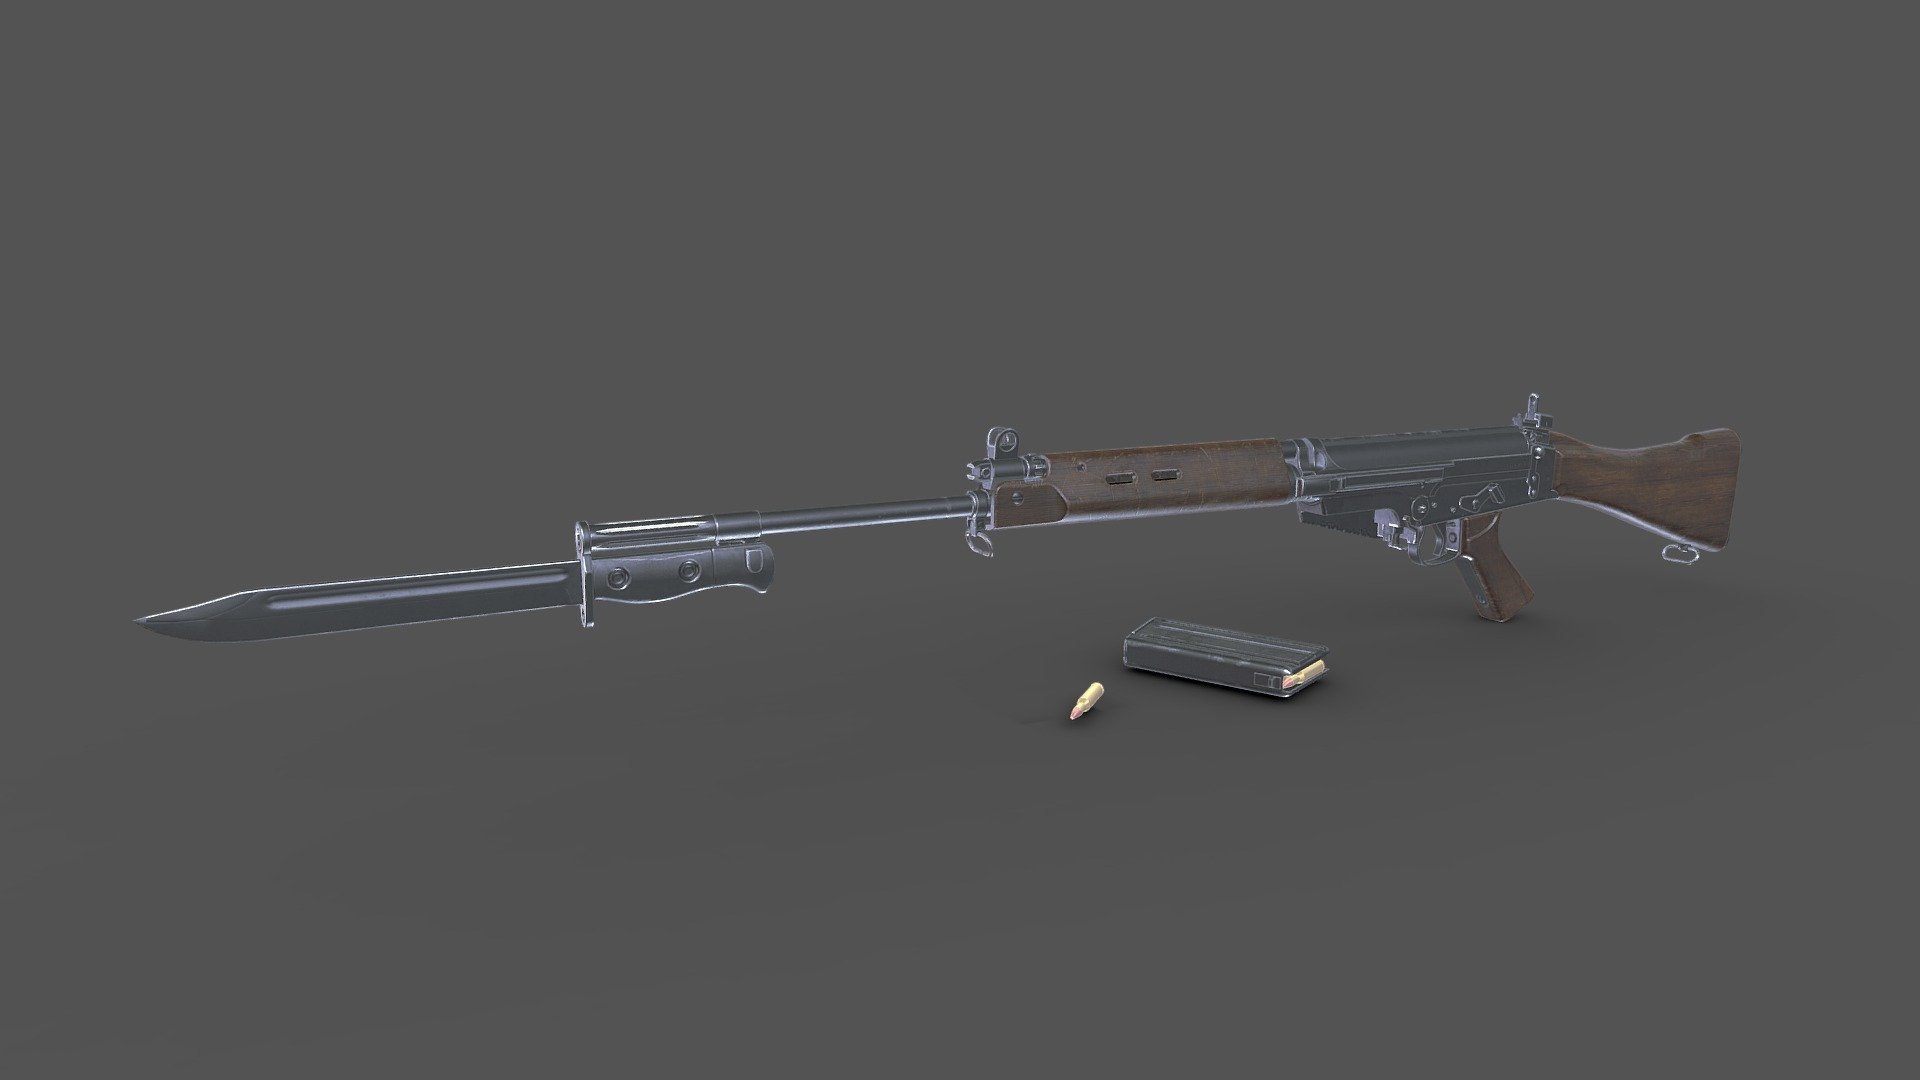 L1A1 Self-Loading Rifle




Low-poly ready to use in AR/VR Games (14,200 tris).

separate objects for animation.

textures are in PNG format 4096x4096 PBR metalness 1 set.

File Units: Centimeter.

Available formats: MAX 2018 and 2015, OBJ, MTL, FBX.

If you need any other file format you can always request it.

All formats include materials and textures.
 - L1A1 Self-Loading Rifle - Buy Royalty Free 3D model by MaX3Dd 3d model